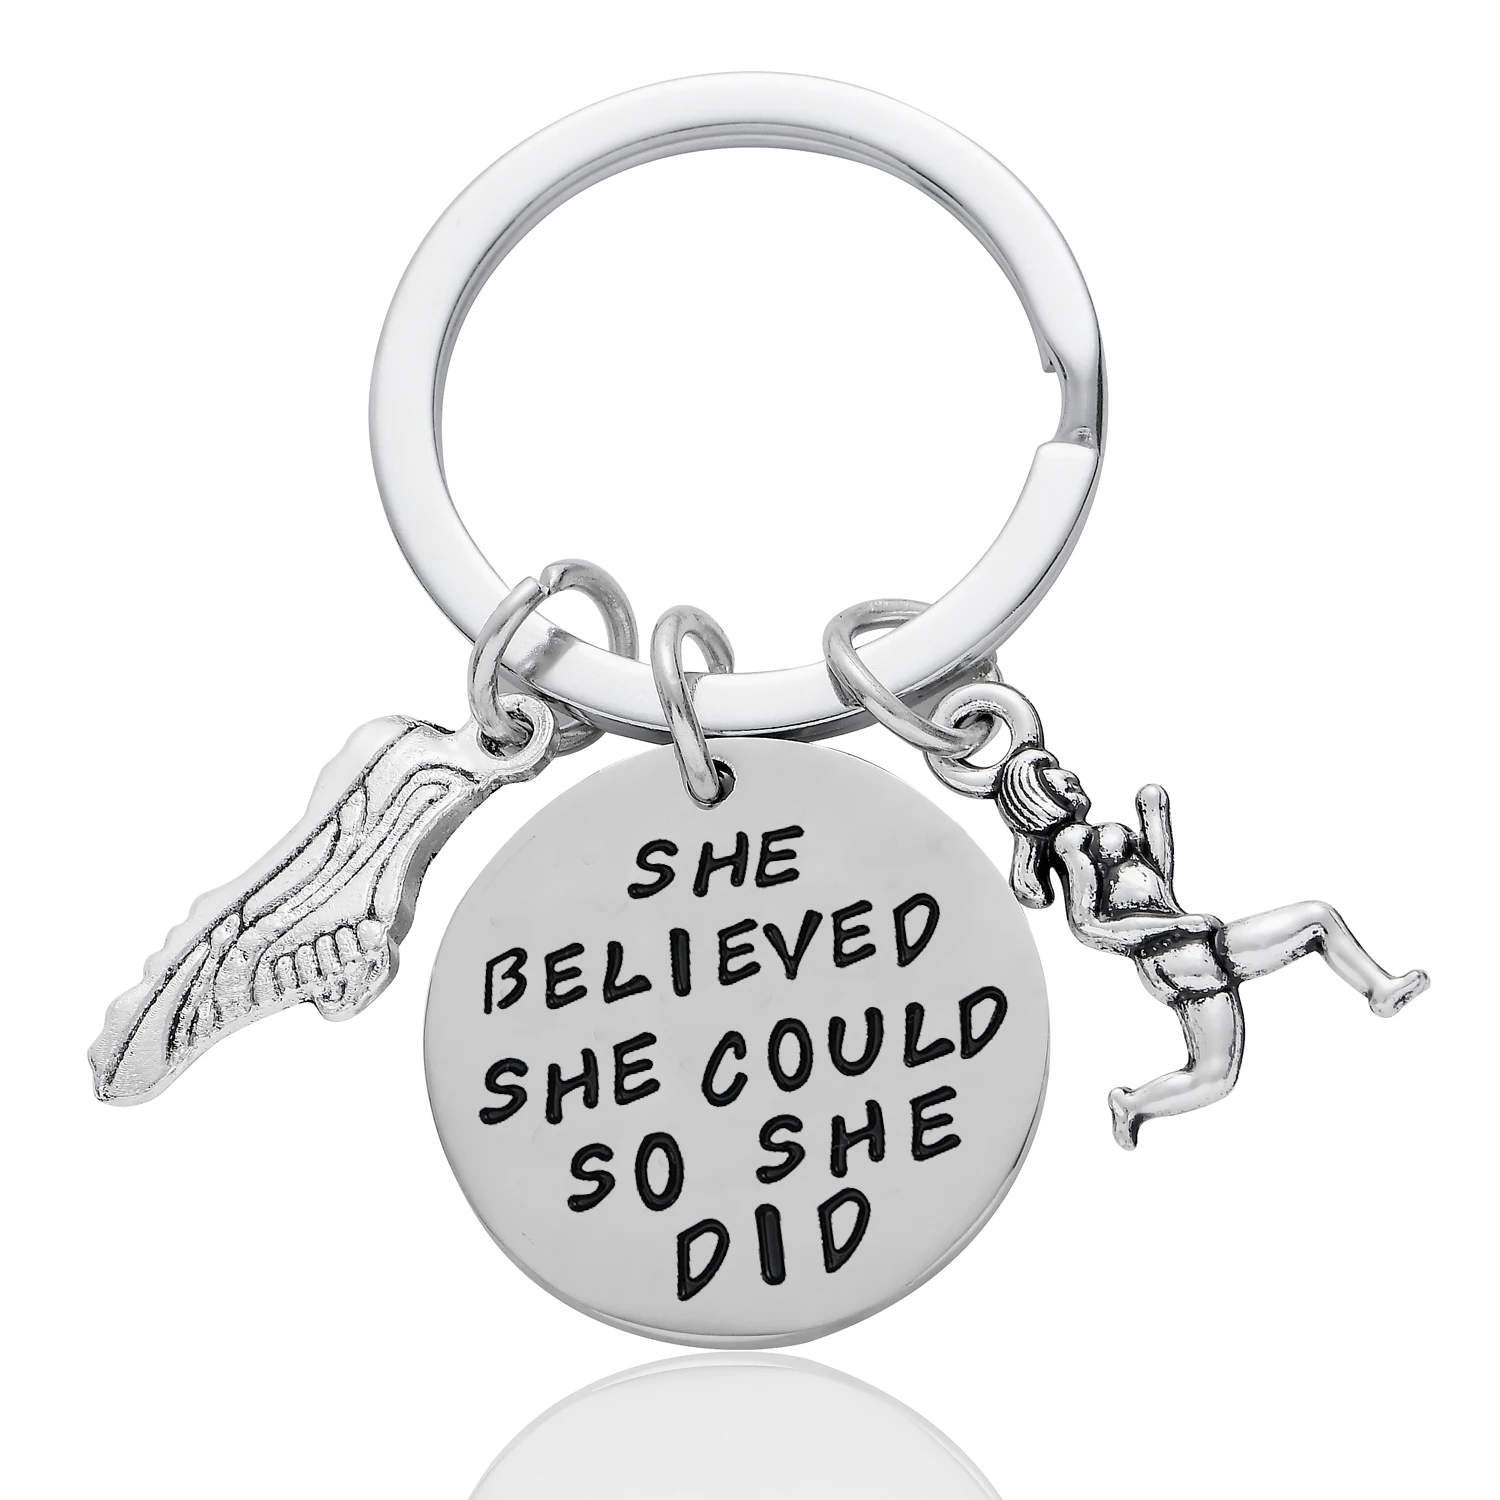 

12PC She Believed She Could So She Did Keychain Runner Shoes Charm Pendant Keyring Women Inspirational Gift Jewelry Key Ring Hot